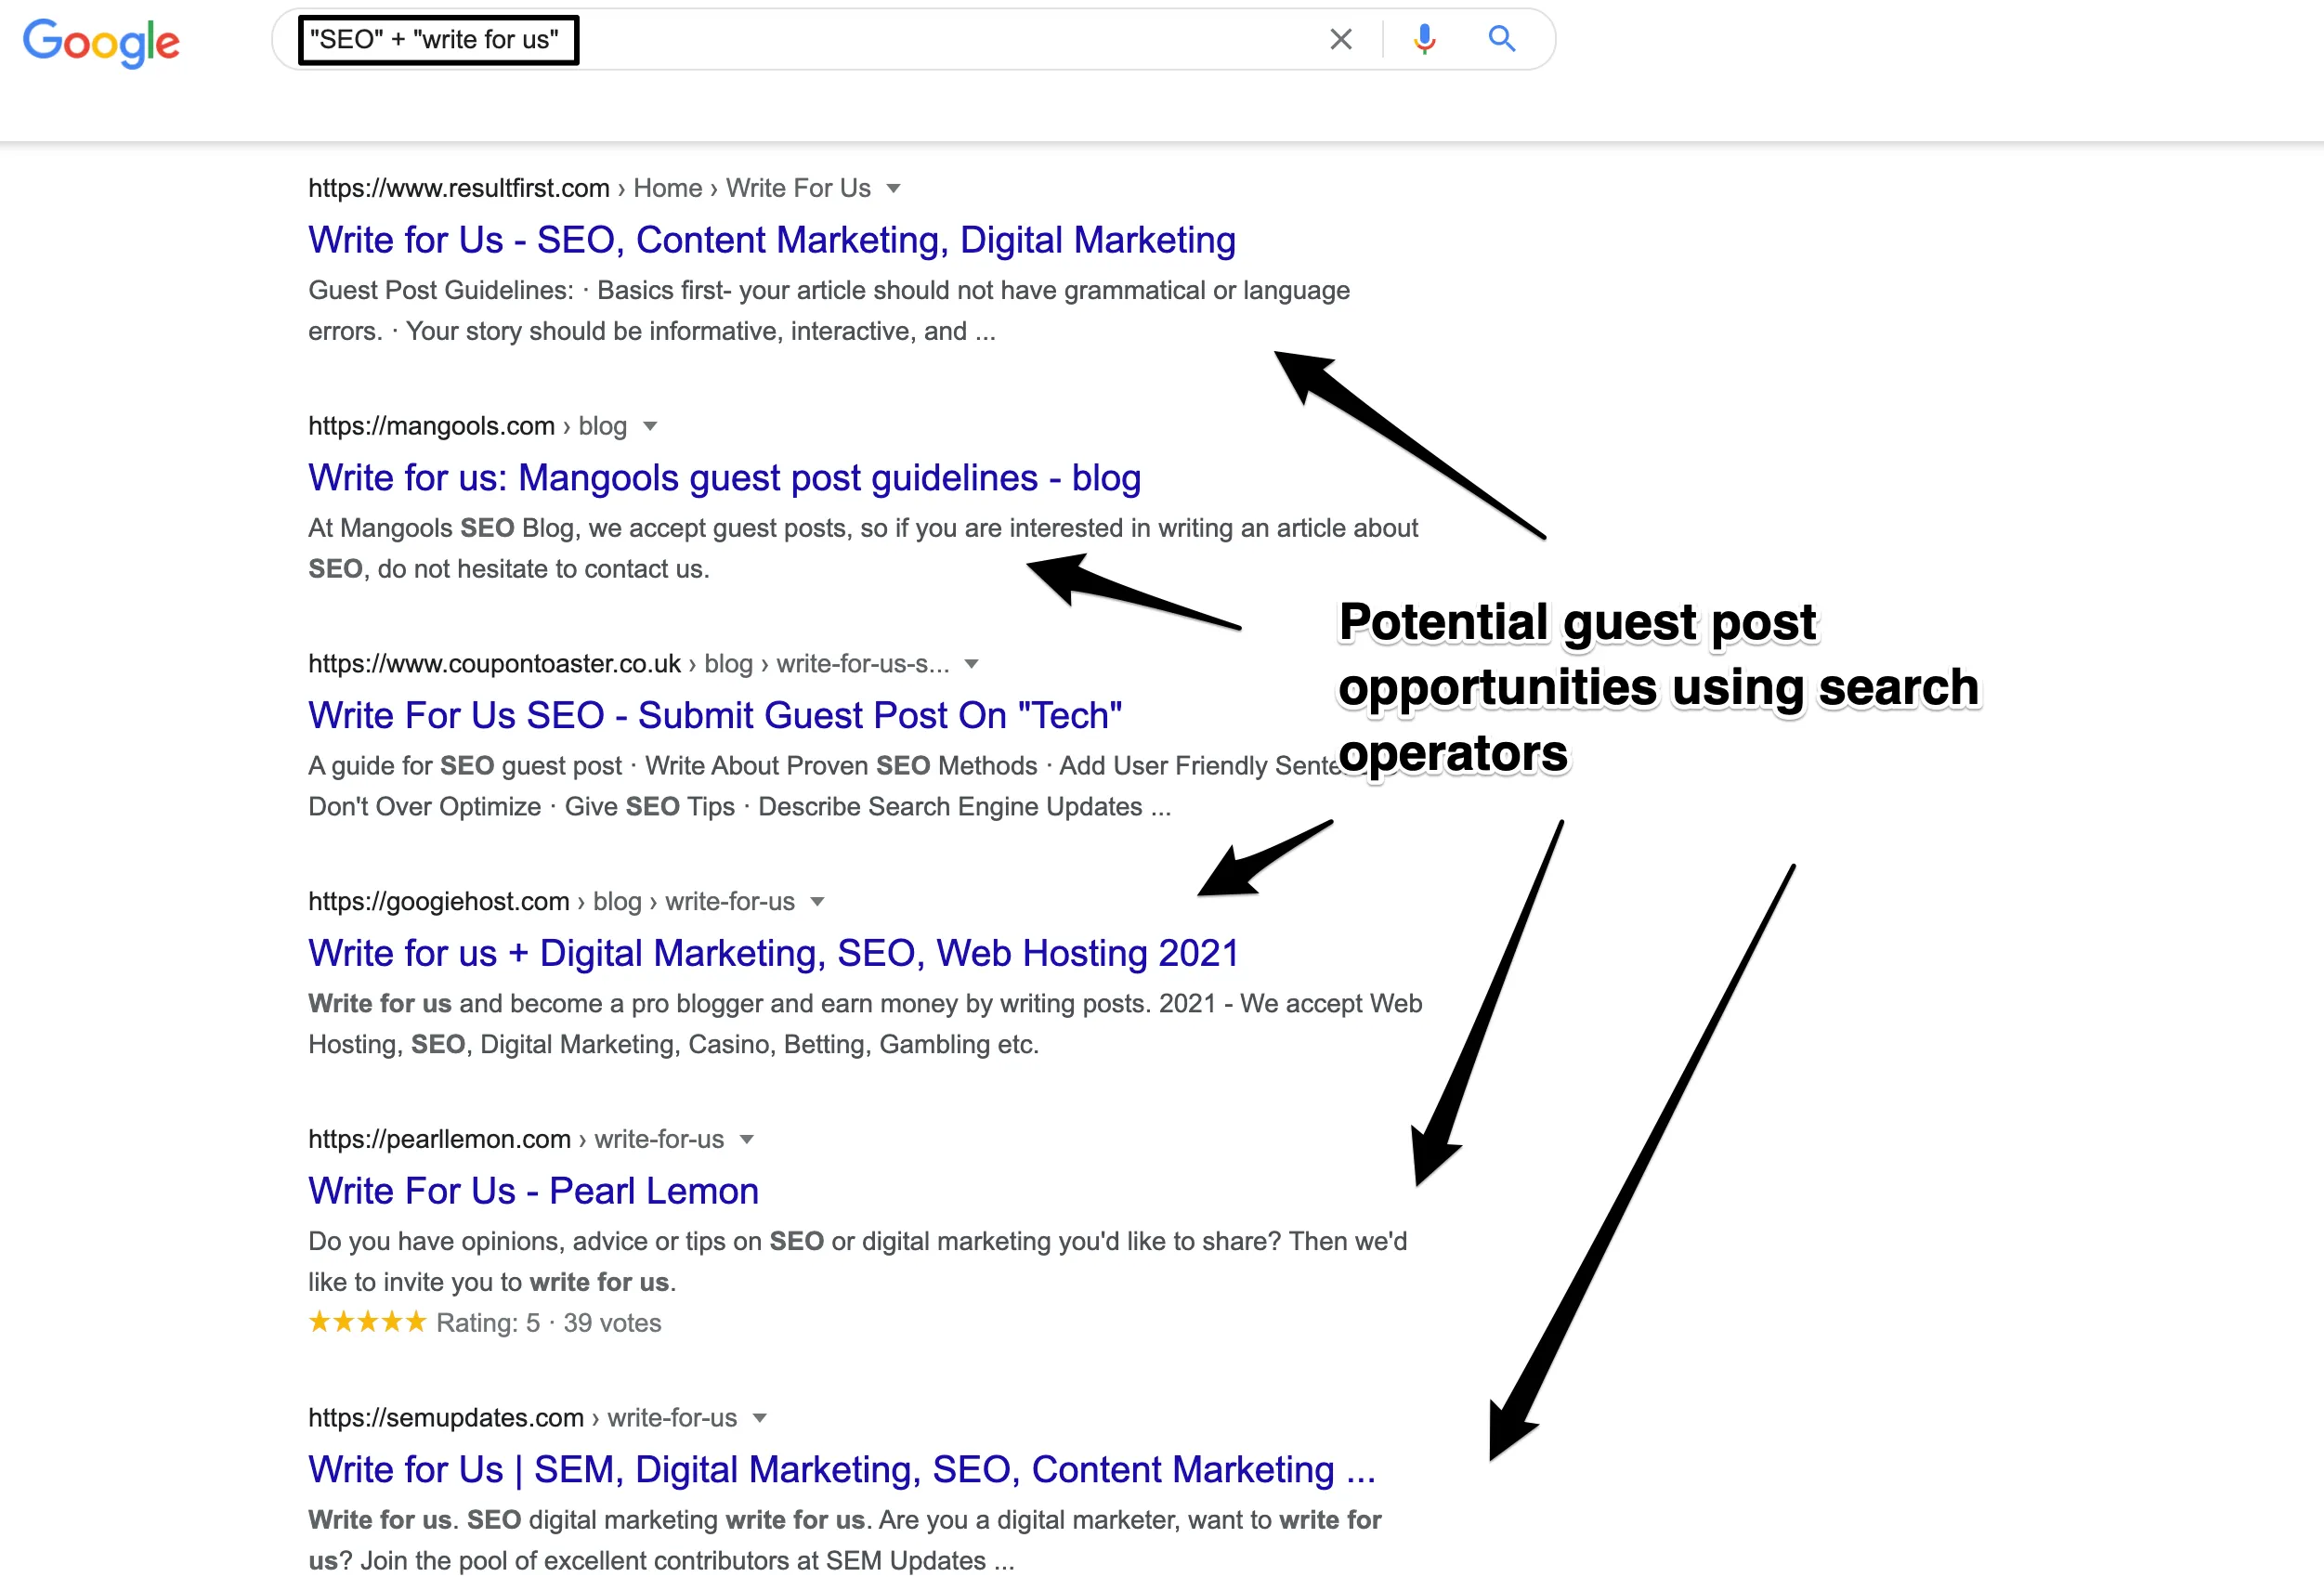 guest posting opportunities by searching on Google